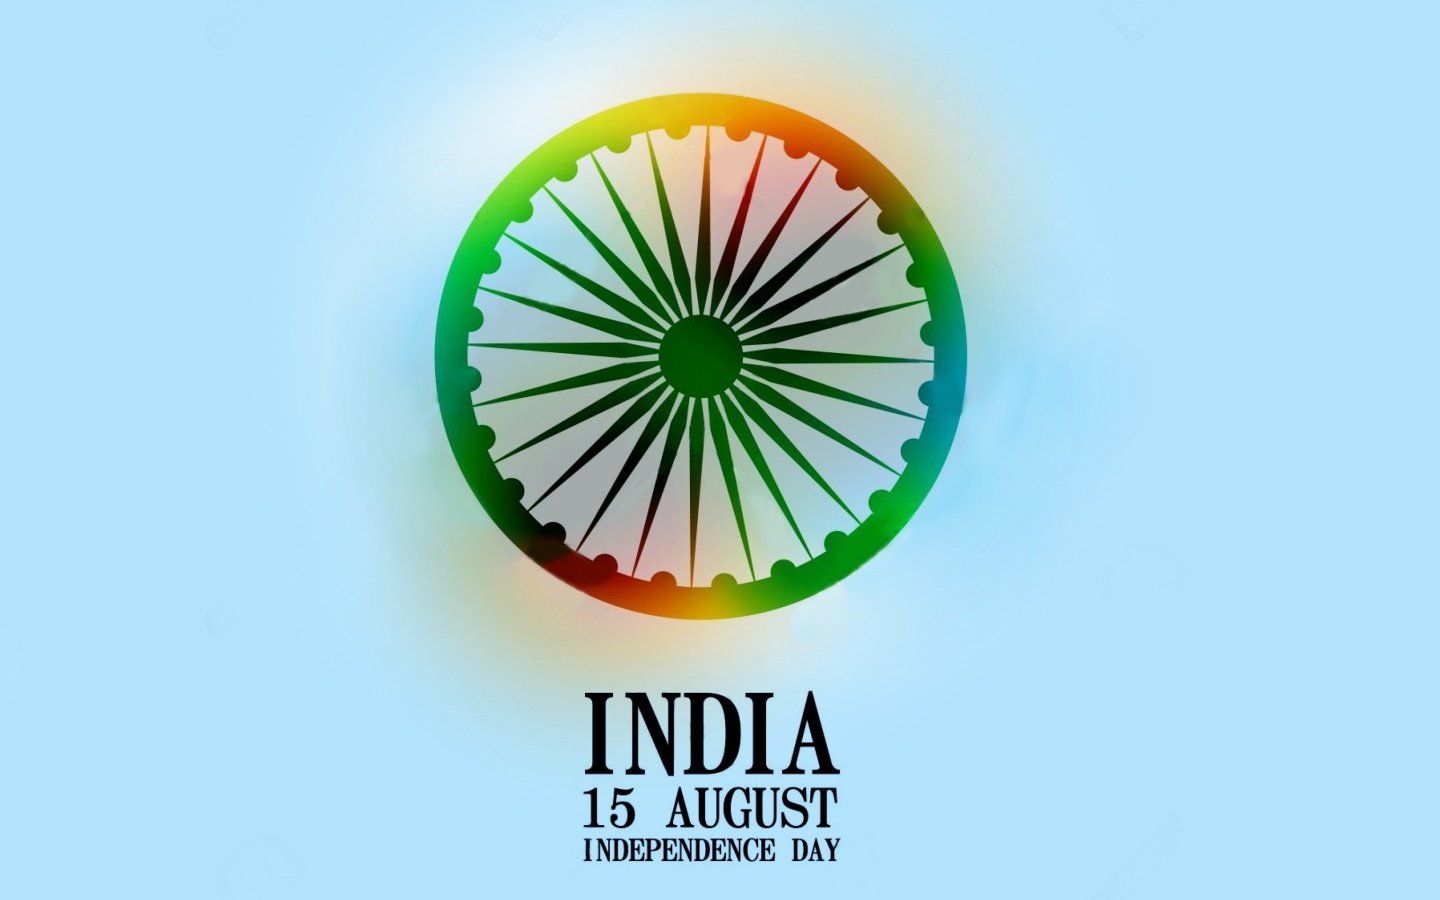 Обои India Independence Day 15 August 1440x900